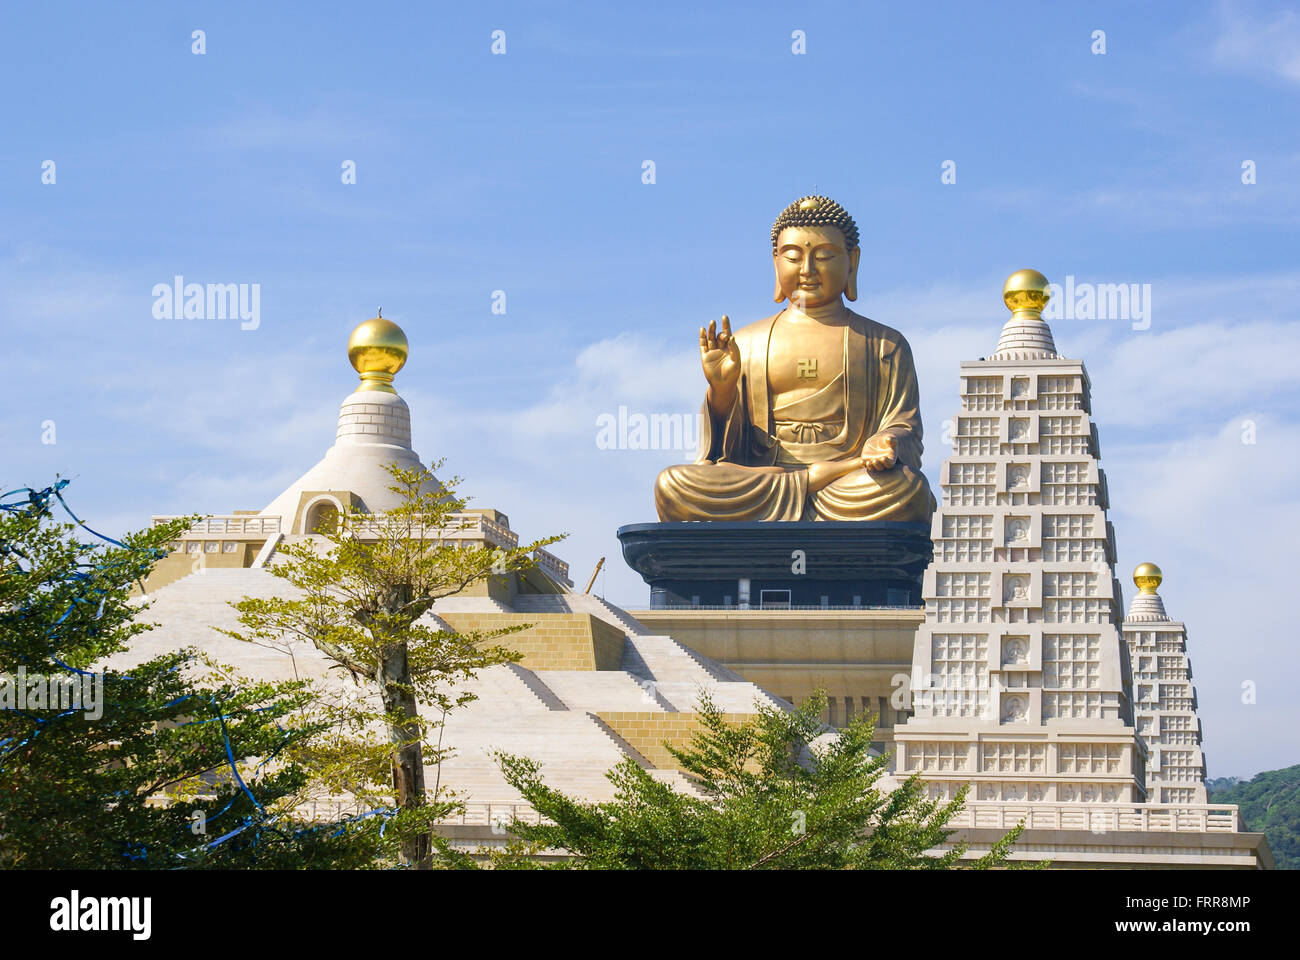 Kaohsiung, Taiwan - August 3,2017 - The giant Buddha statue at Fo Guang Shan Stock Photo